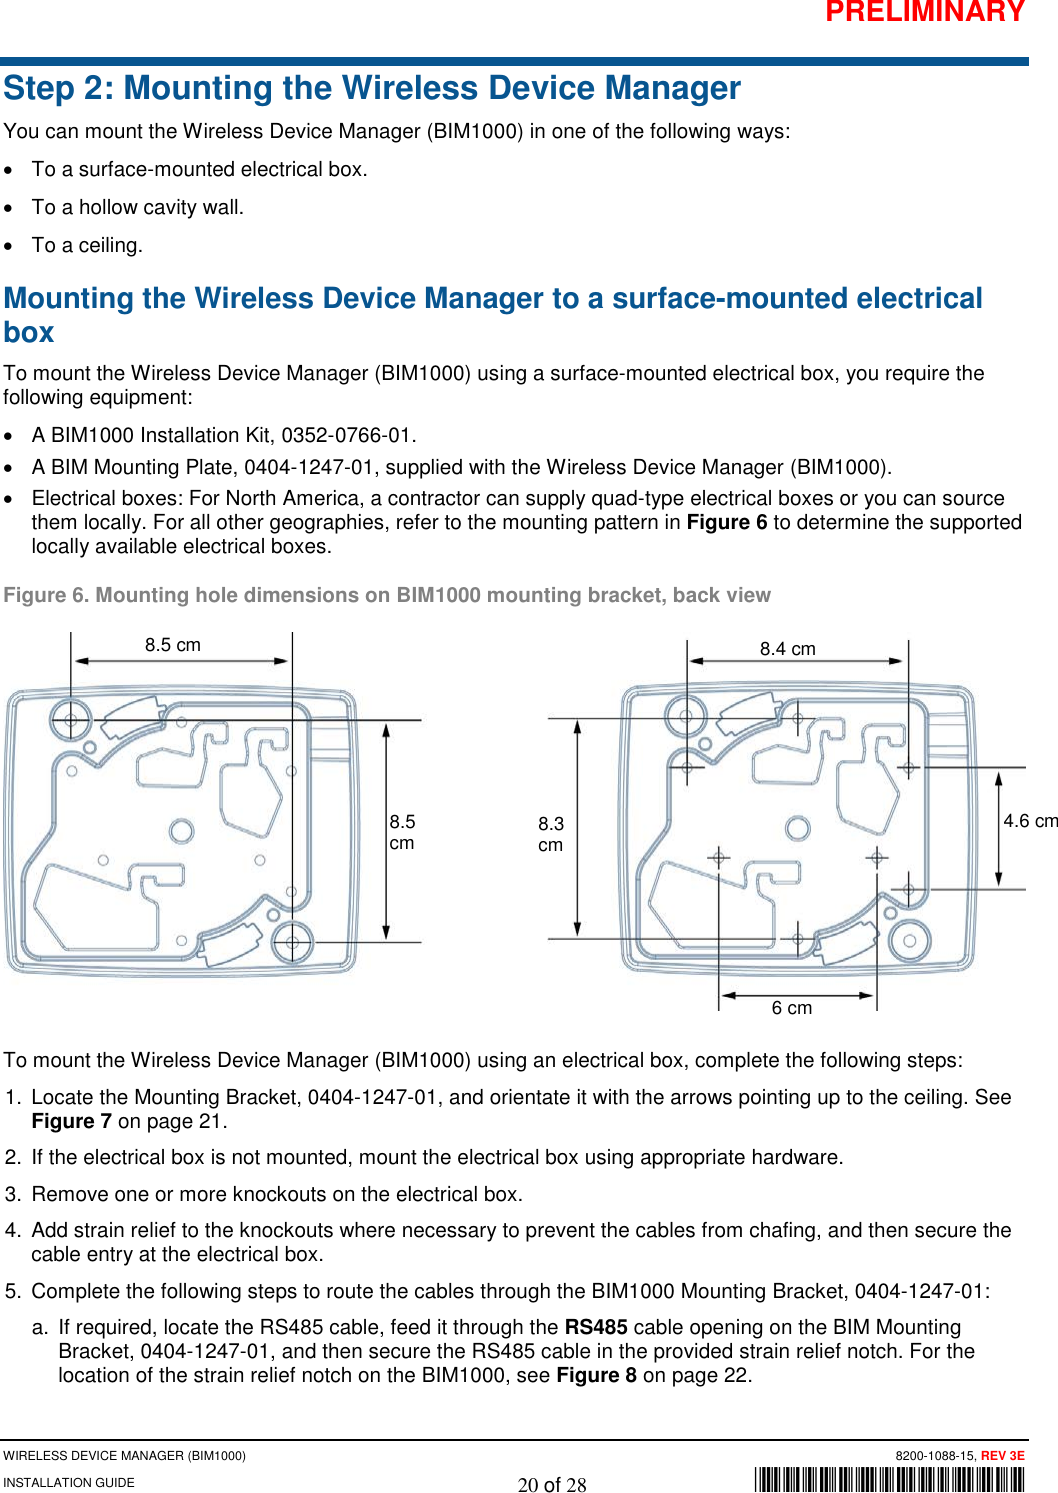 PRELIMINARY WIRELESS DEVICE MANAGER (BIM1000)      8200-1088-15, REV 3E INSTALLATION GUIDE    20 of 28        *8200-1088-15* Step 2: Mounting the Wireless Device Manager You can mount the Wireless Device Manager (BIM1000) in one of the following ways: • To a surface-mounted electrical box.  • To a hollow cavity wall.  • To a ceiling. Mounting the Wireless Device Manager to a surface-mounted electrical box To mount the Wireless Device Manager (BIM1000) using a surface-mounted electrical box, you require the following equipment: • A BIM1000 Installation Kit, 0352-0766-01. • A BIM Mounting Plate, 0404-1247-01, supplied with the Wireless Device Manager (BIM1000).  • Electrical boxes: For North America, a contractor can supply quad-type electrical boxes or you can source them locally. For all other geographies, refer to the mounting pattern in Figure 6 to determine the supported locally available electrical boxes.  Figure 6. Mounting hole dimensions on BIM1000 mounting bracket, back view  To mount the Wireless Device Manager (BIM1000) using an electrical box, complete the following steps: 1. Locate the Mounting Bracket, 0404-1247-01, and orientate it with the arrows pointing up to the ceiling. See Figure 7 on page 21. 2. If the electrical box is not mounted, mount the electrical box using appropriate hardware.  3. Remove one or more knockouts on the electrical box. 4. Add strain relief to the knockouts where necessary to prevent the cables from chafing, and then secure the cable entry at the electrical box. 5. Complete the following steps to route the cables through the BIM1000 Mounting Bracket, 0404-1247-01: a. If required, locate the RS485 cable, feed it through the RS485 cable opening on the BIM Mounting Bracket, 0404-1247-01, and then secure the RS485 cable in the provided strain relief notch. For the location of the strain relief notch on the BIM1000, see Figure 8 on page 22. 8.5 cm 8.5 cm 8.4 cm 8.3 cm 6 cm 4.6 cm 